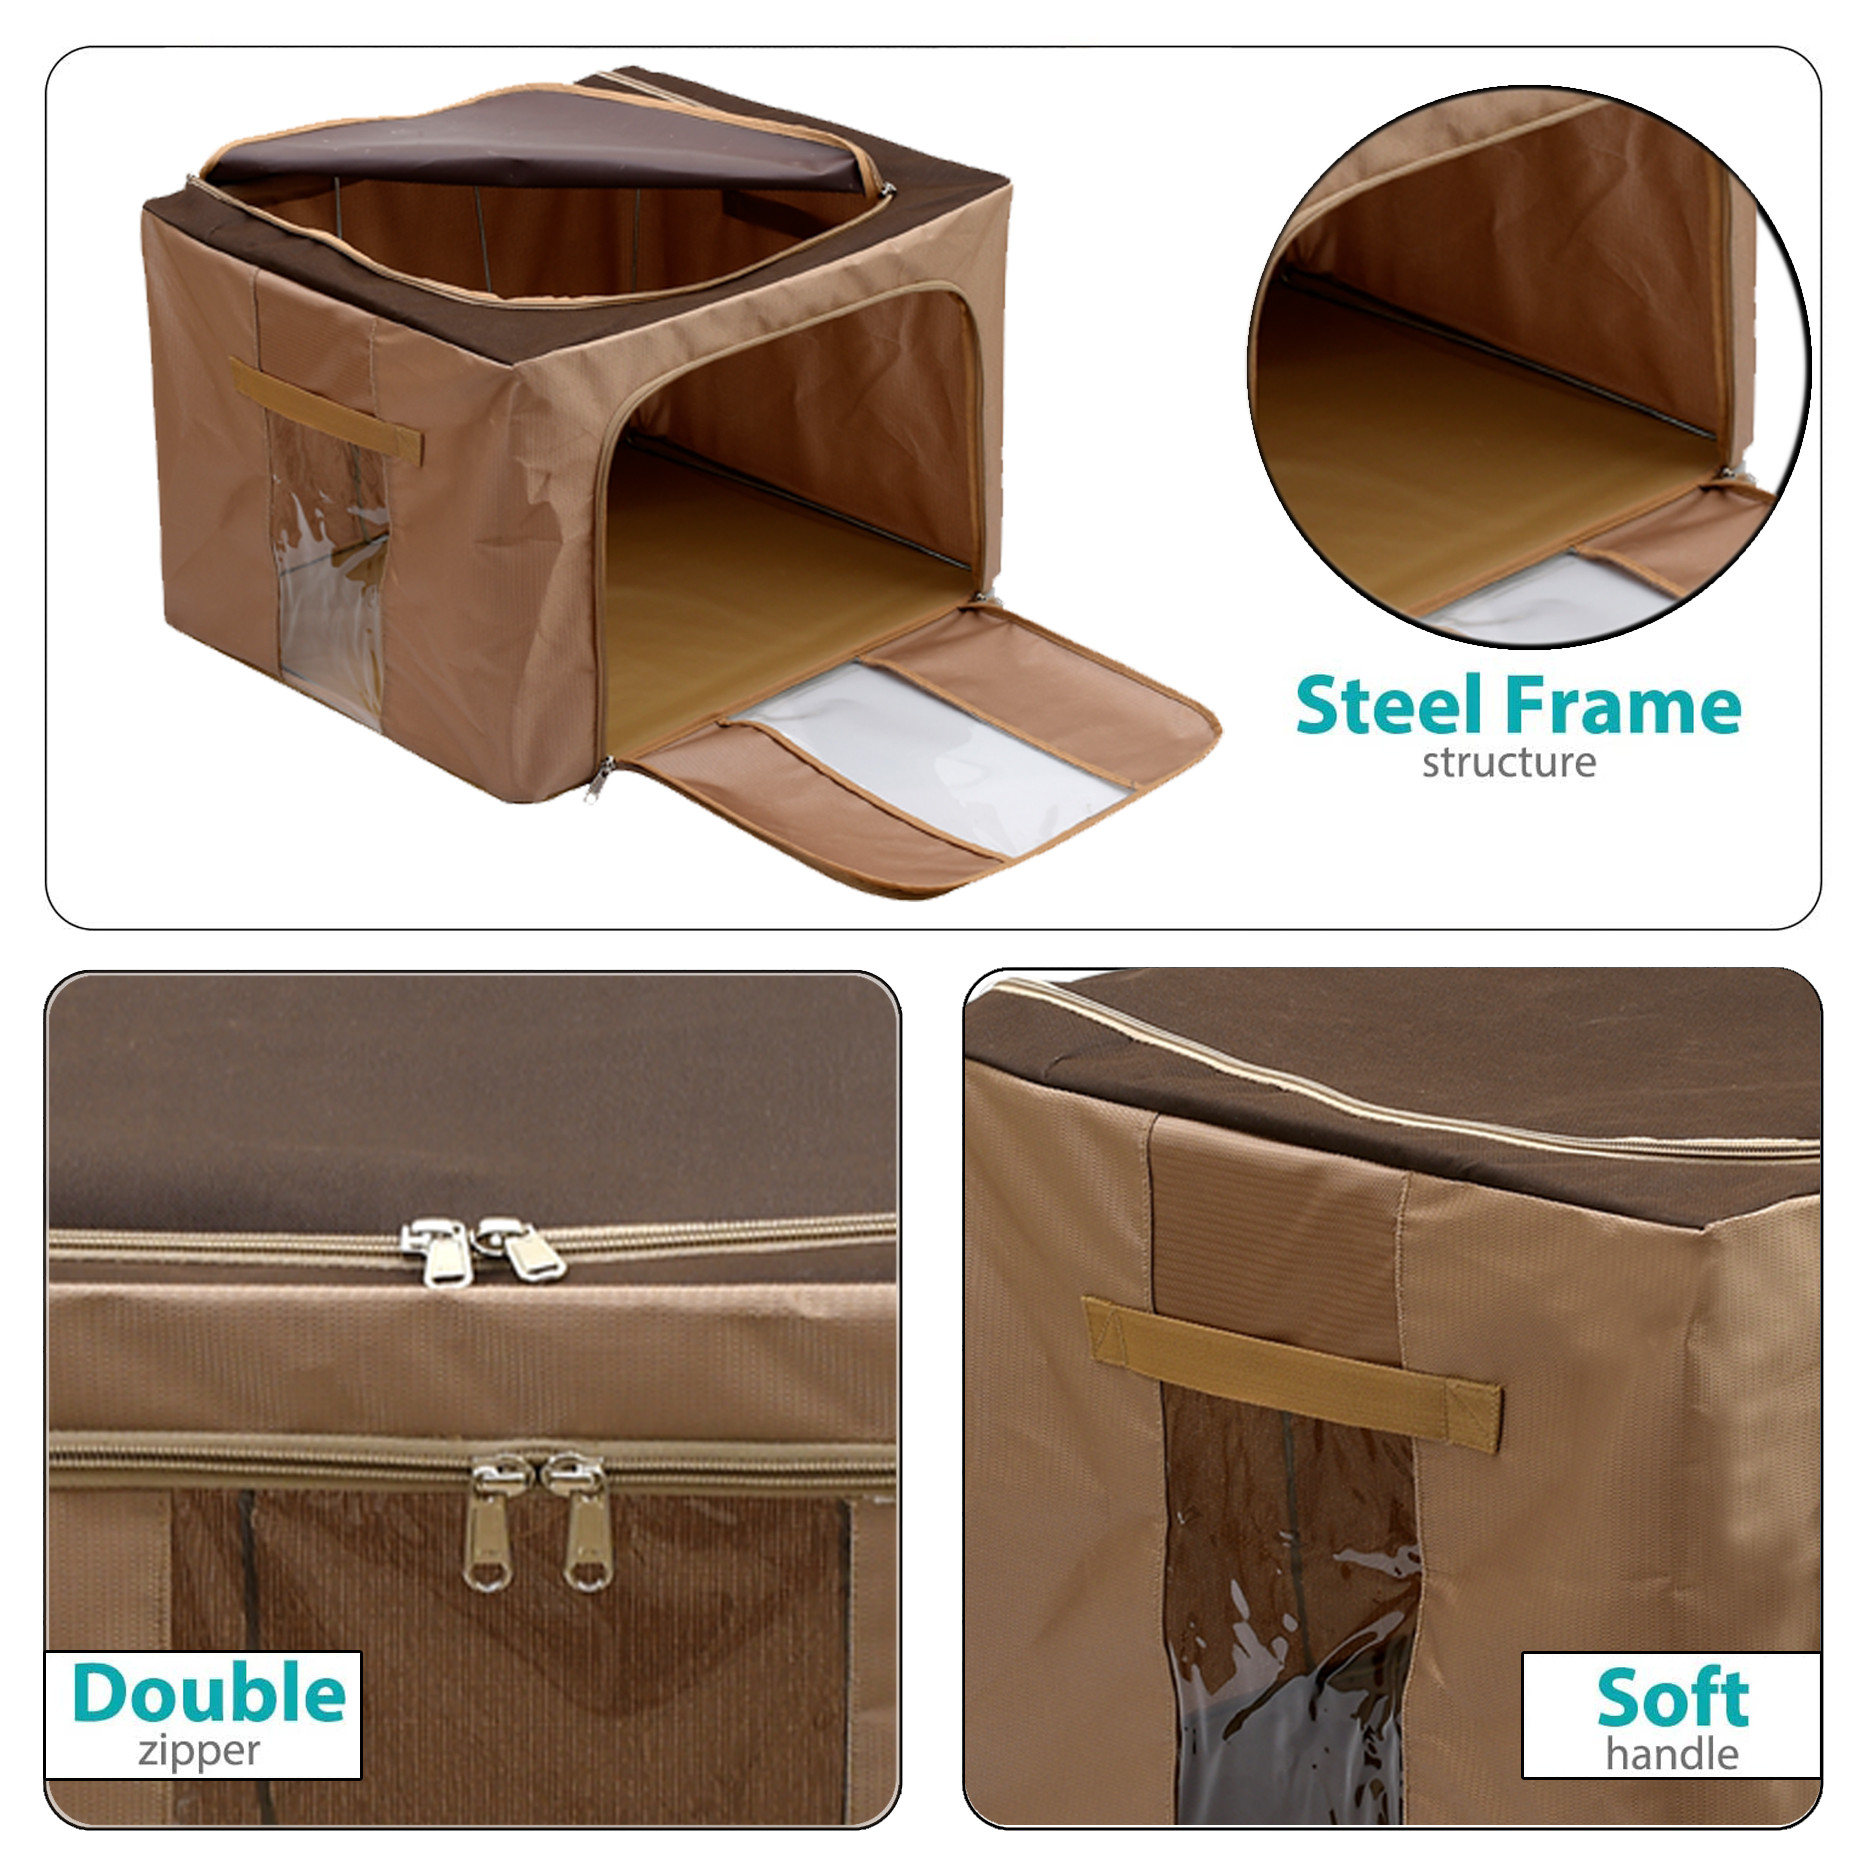 Kuber Industries Steel Frame Storage Box/Organizer For Clothing, Blankets, Bedding With Clear Window, 88Ltr. (Brown)-44KM0317